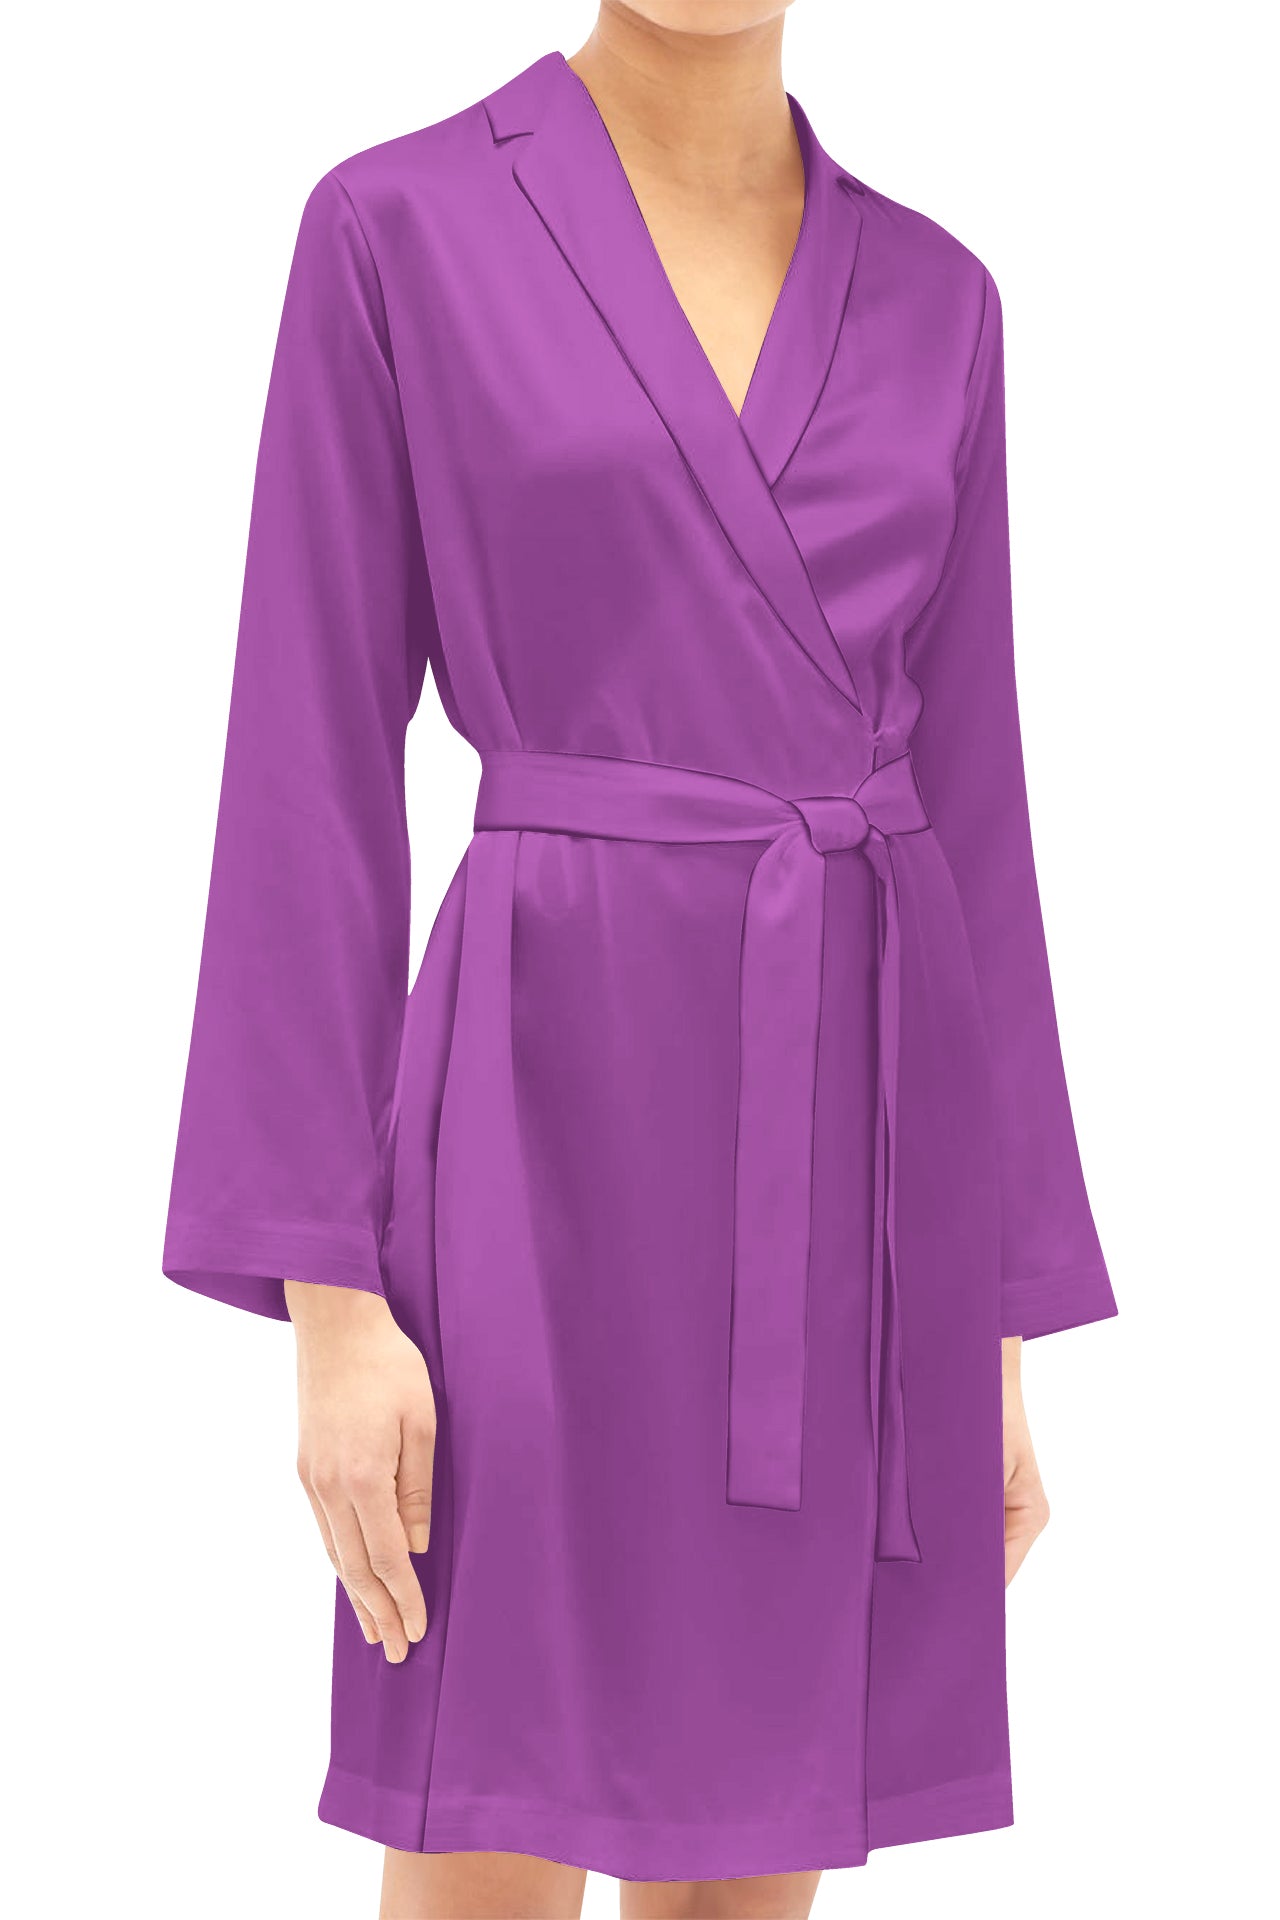 Made With Organic Silk Mini Length Wrap Dress in Solid